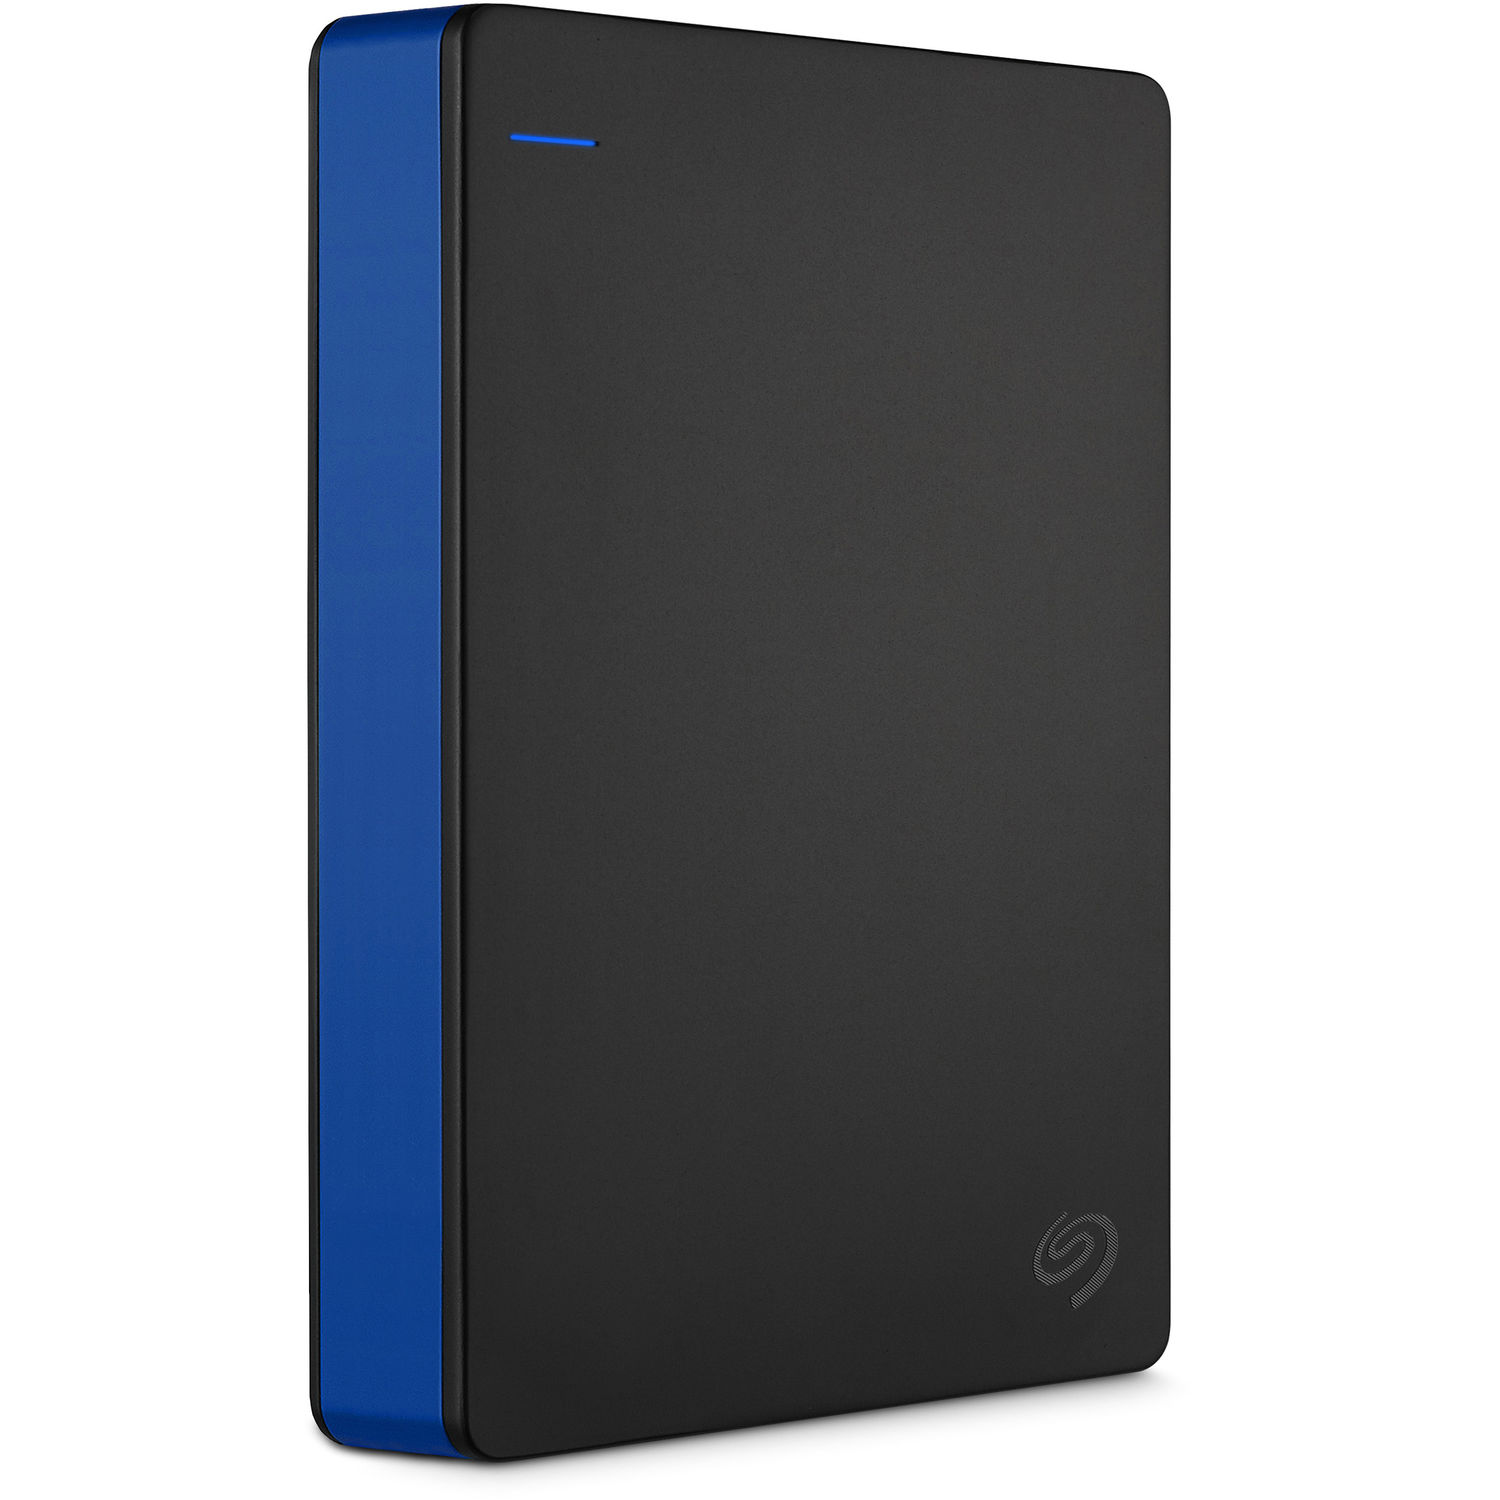 seagate game drive for ps4